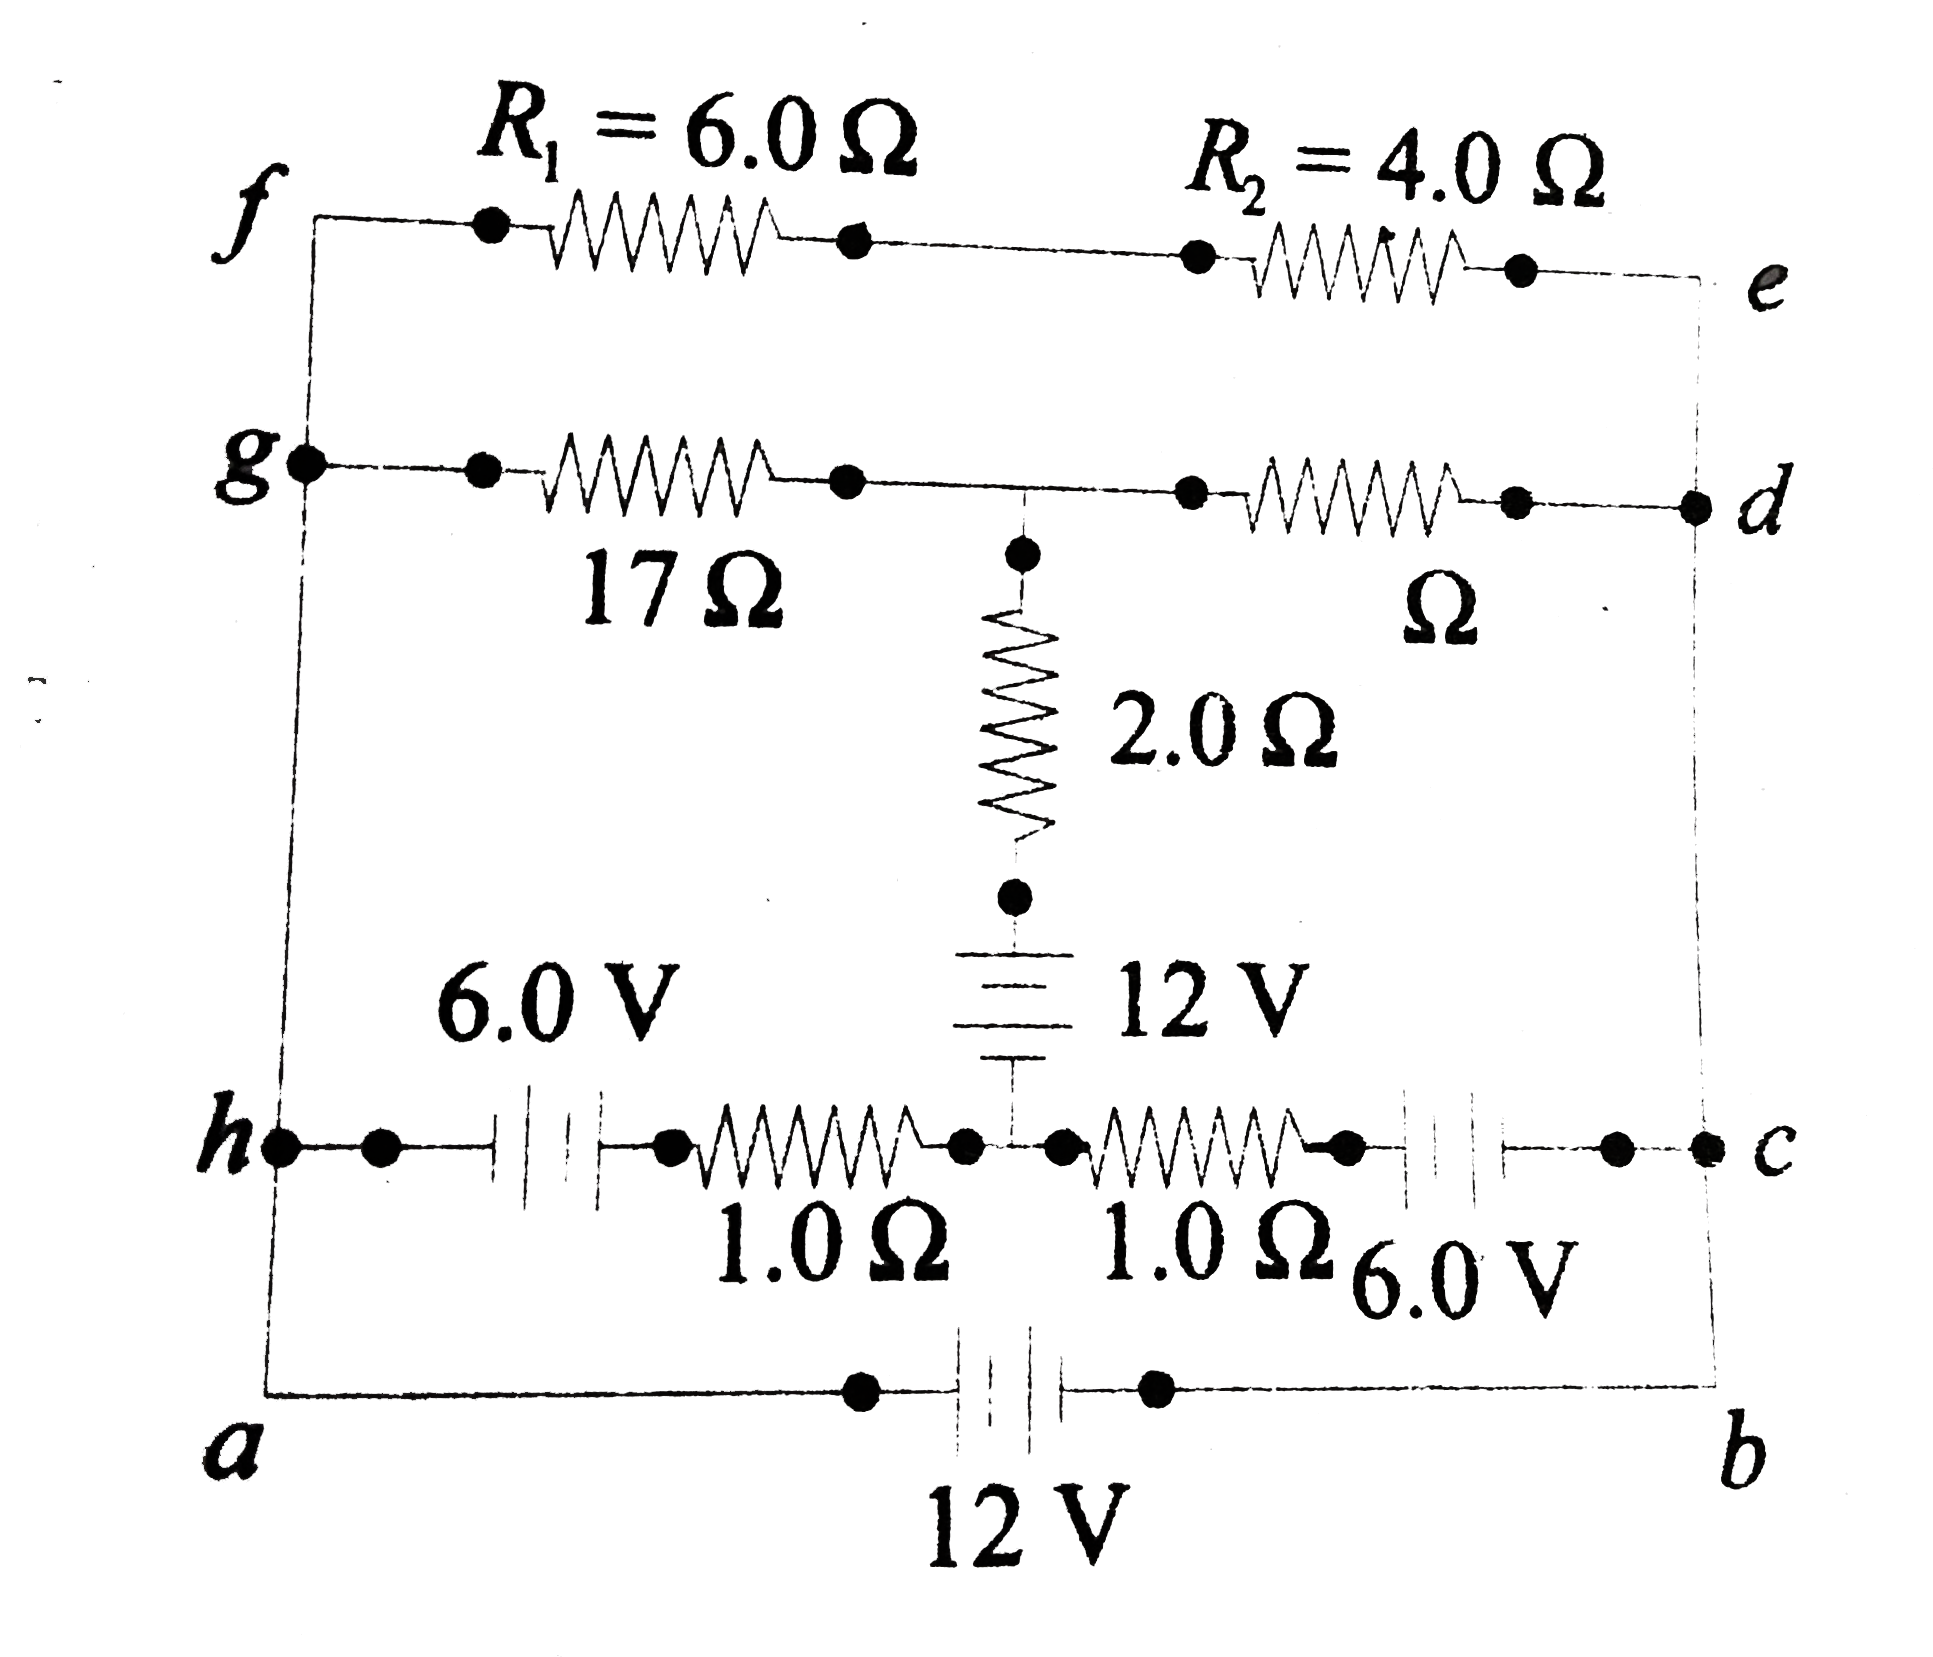 In the circuit shown in fig. mark the correct options.